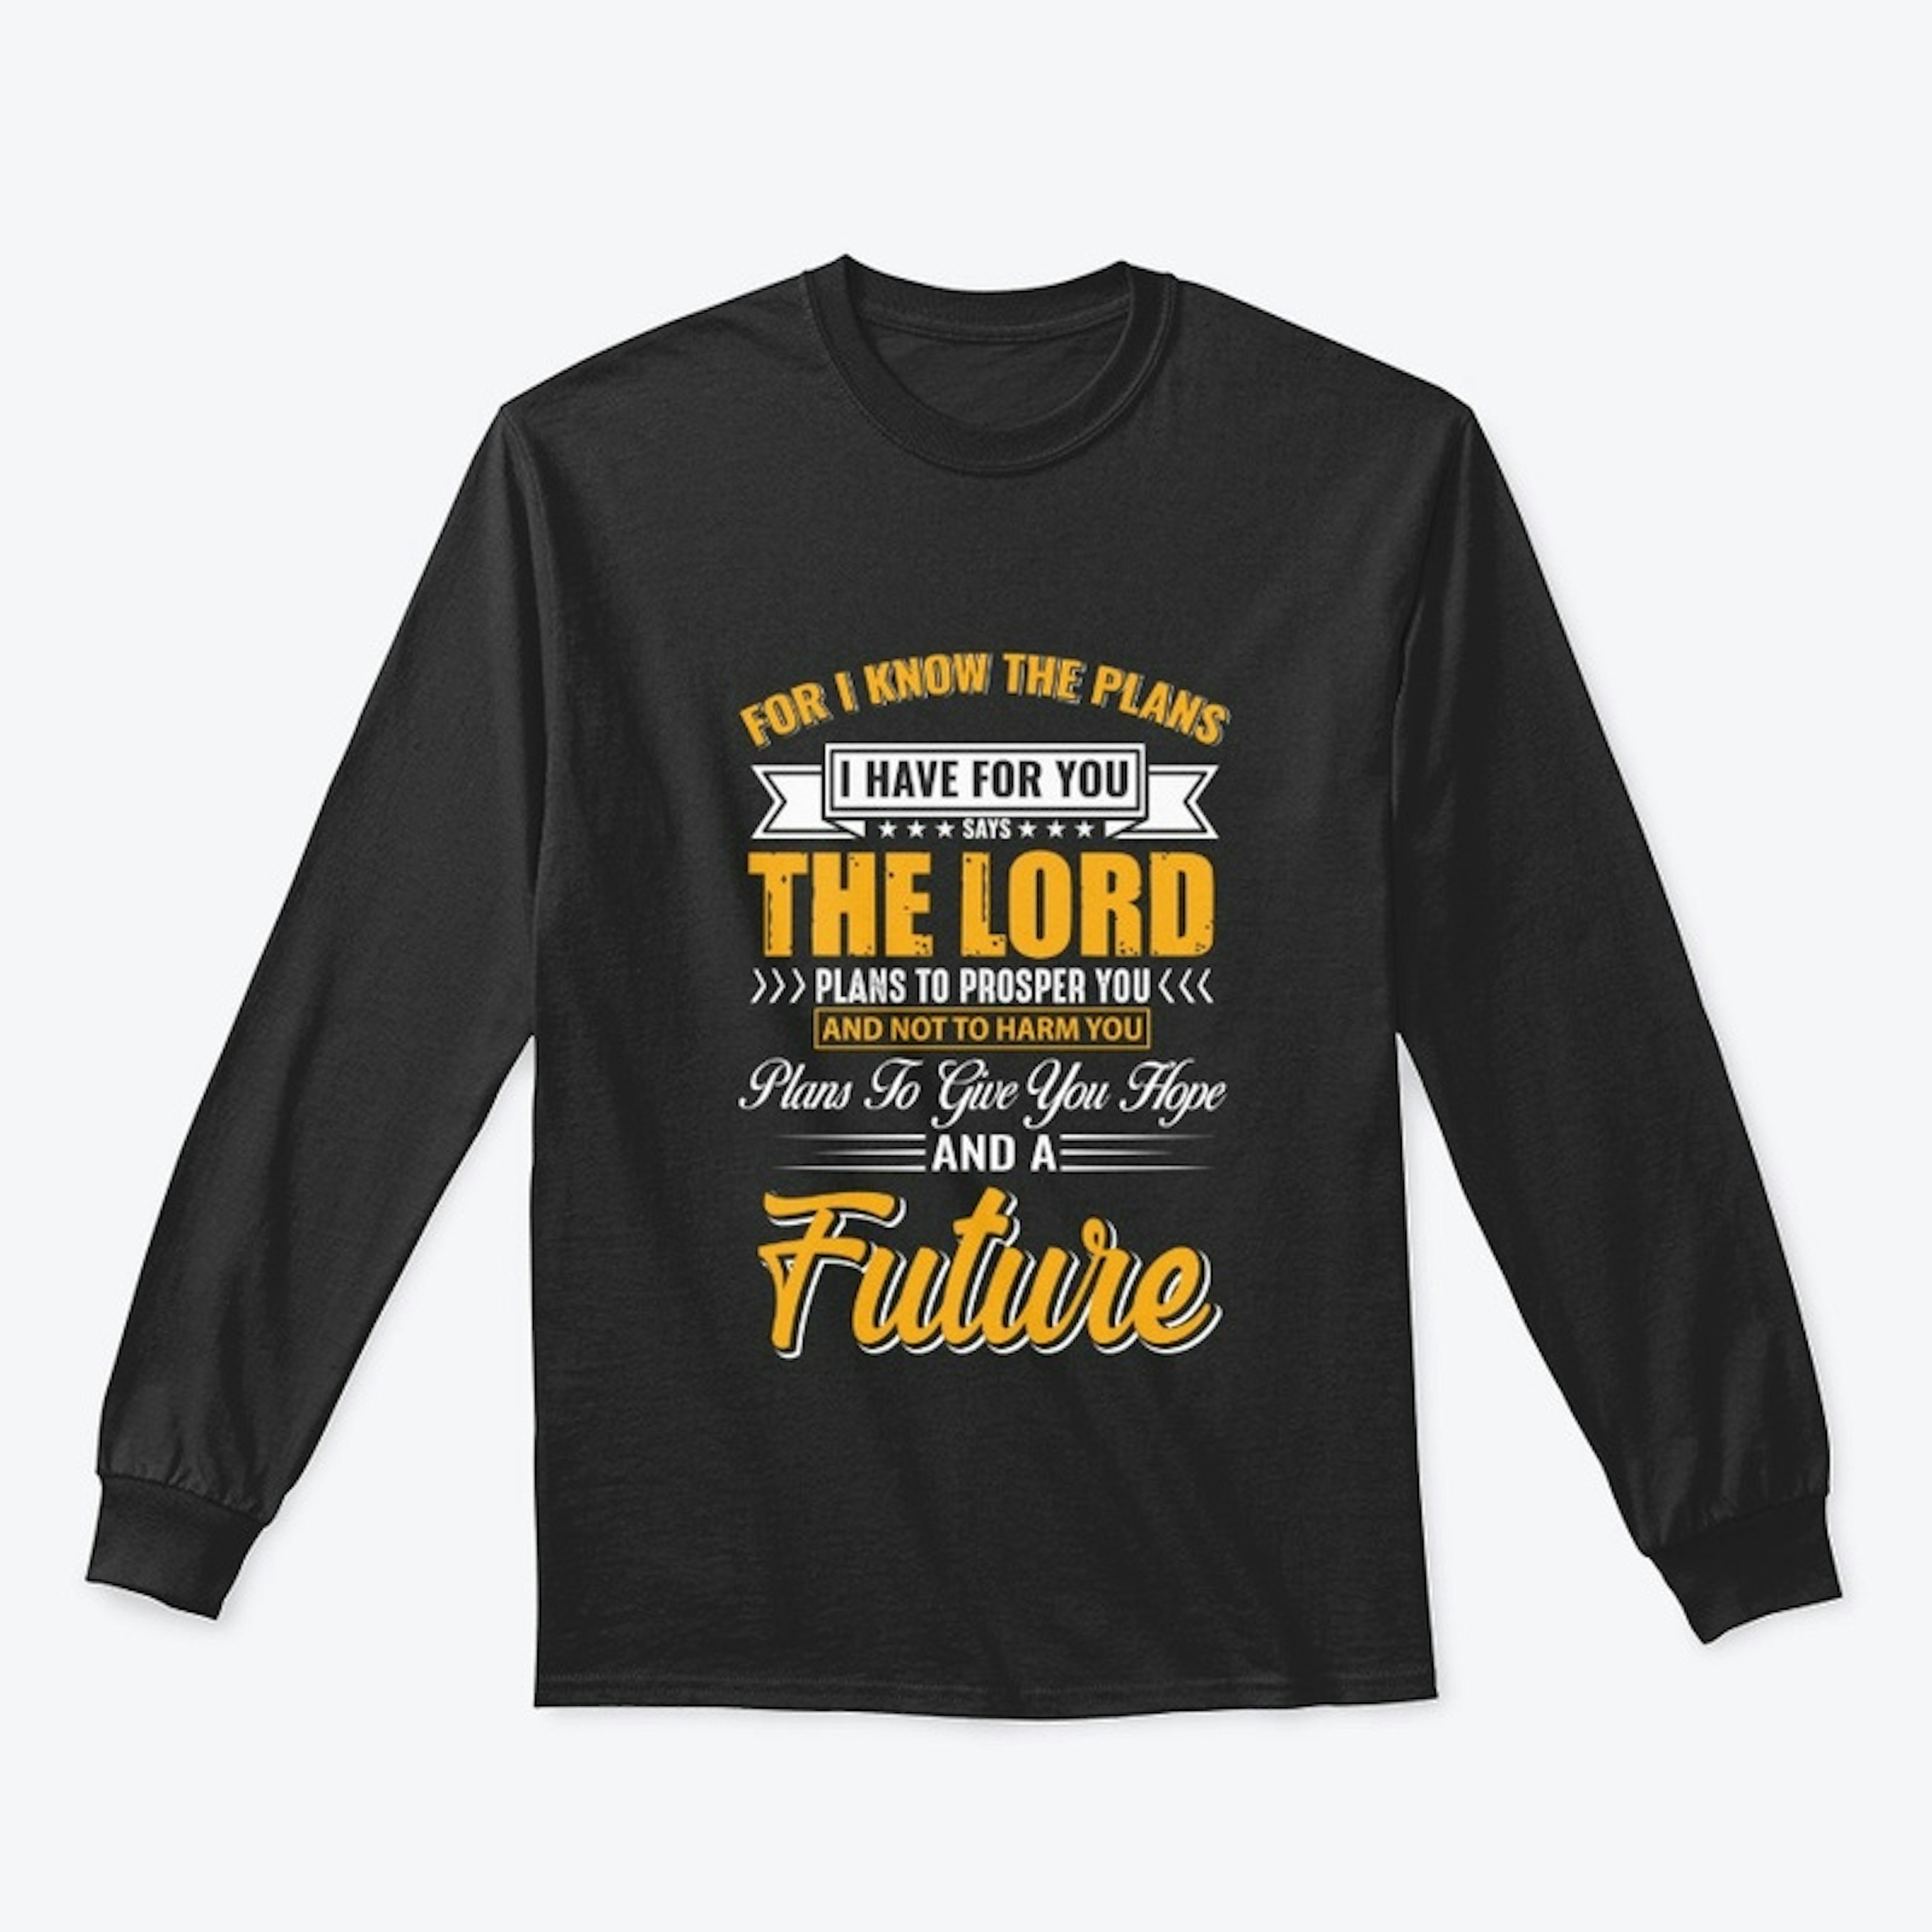 Christian tees about our future